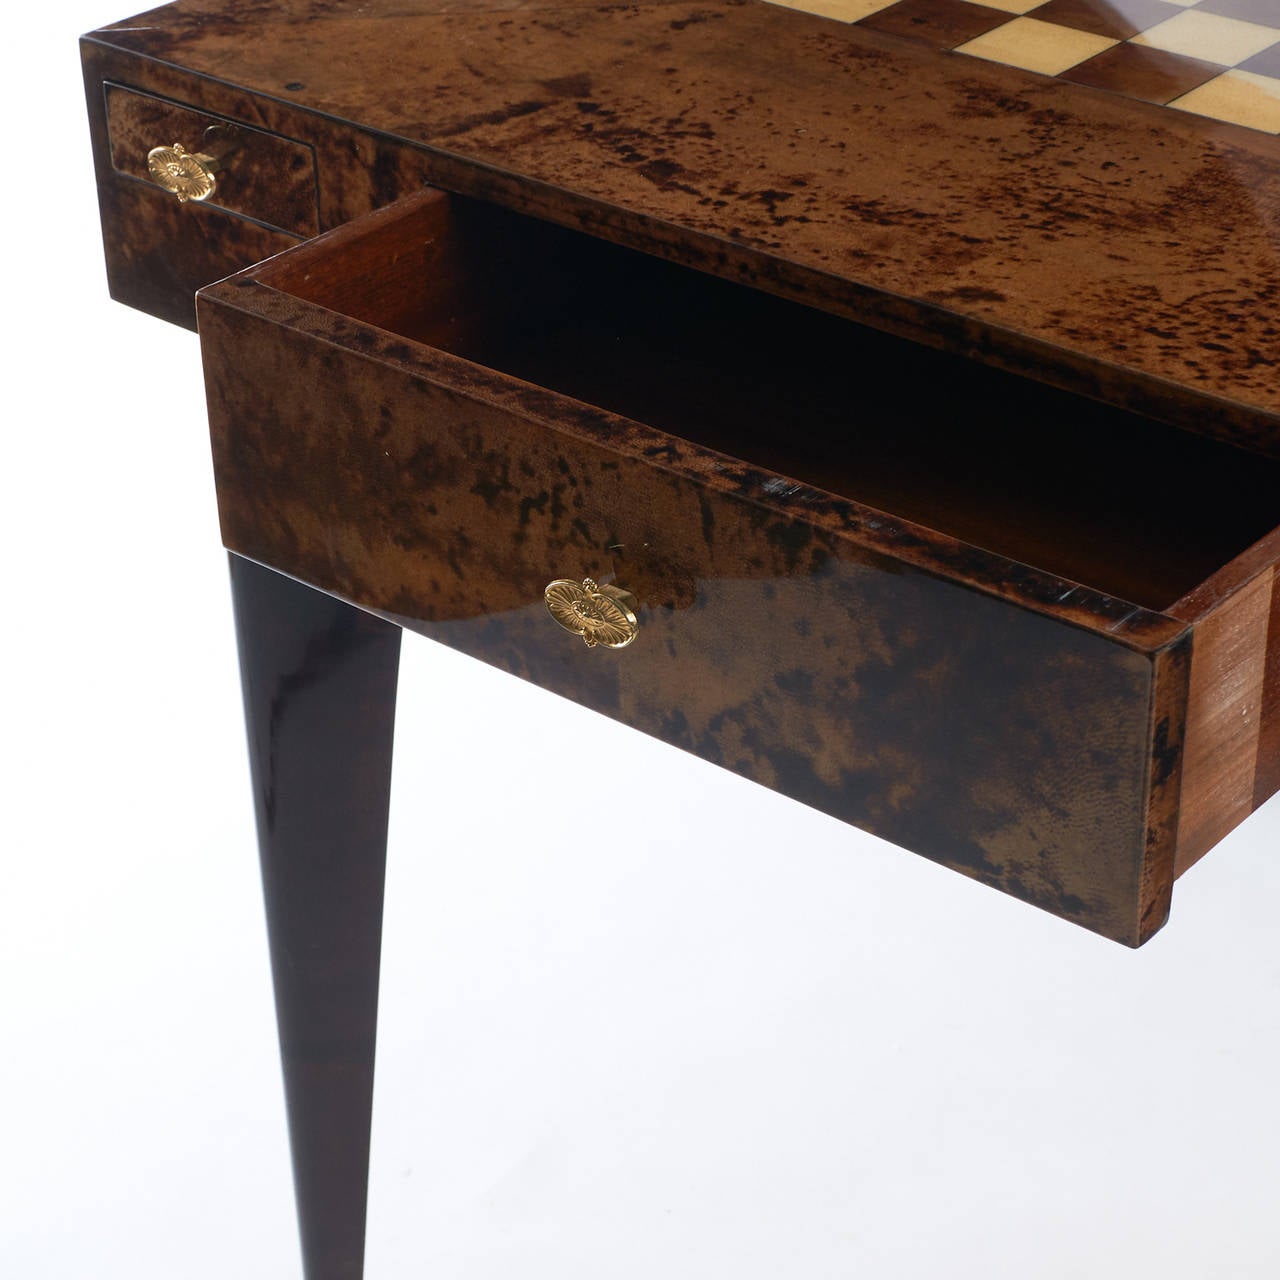 A parchment game table with a chess board surface. Drawer for game pieces and four slide-out cigarette trays. Please note, two of the brass dishes are missing.